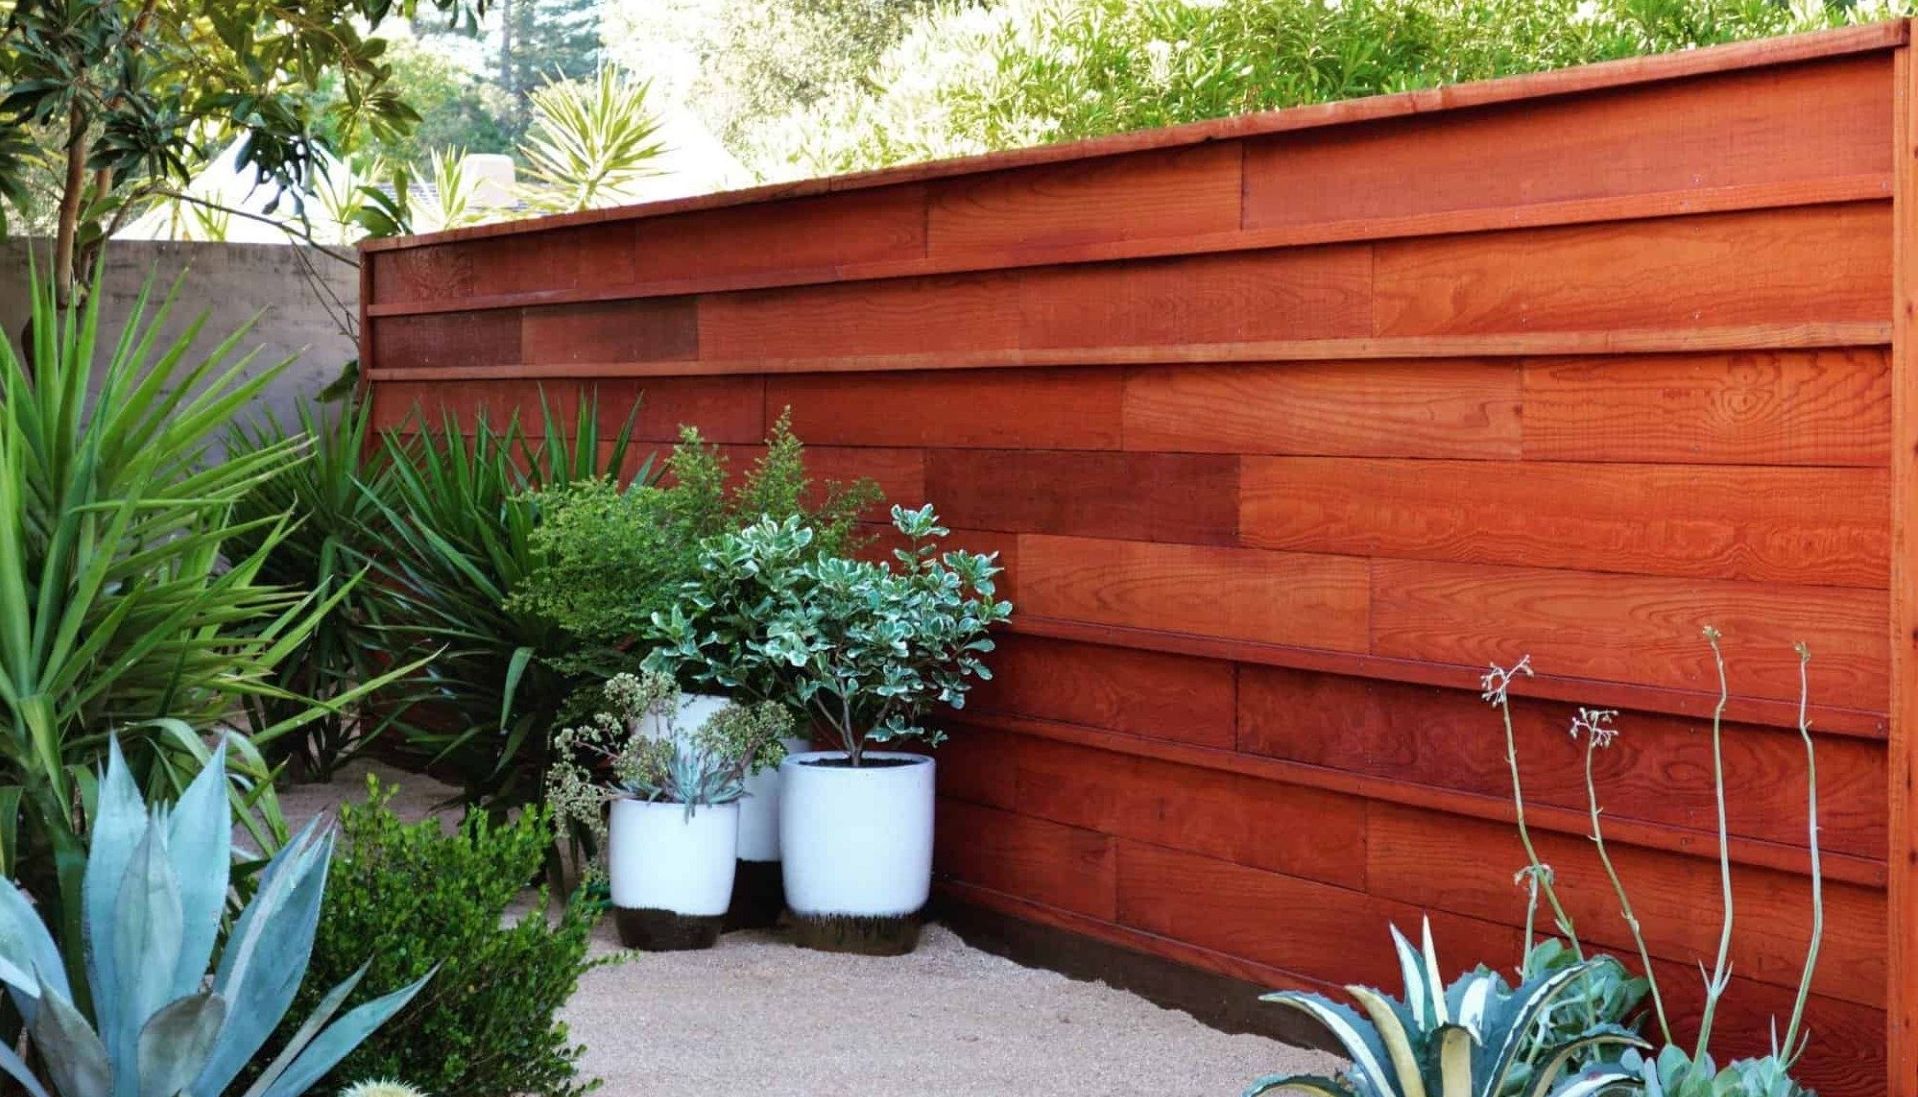 How to Balance Form and Function in Your Retaining Wall Design